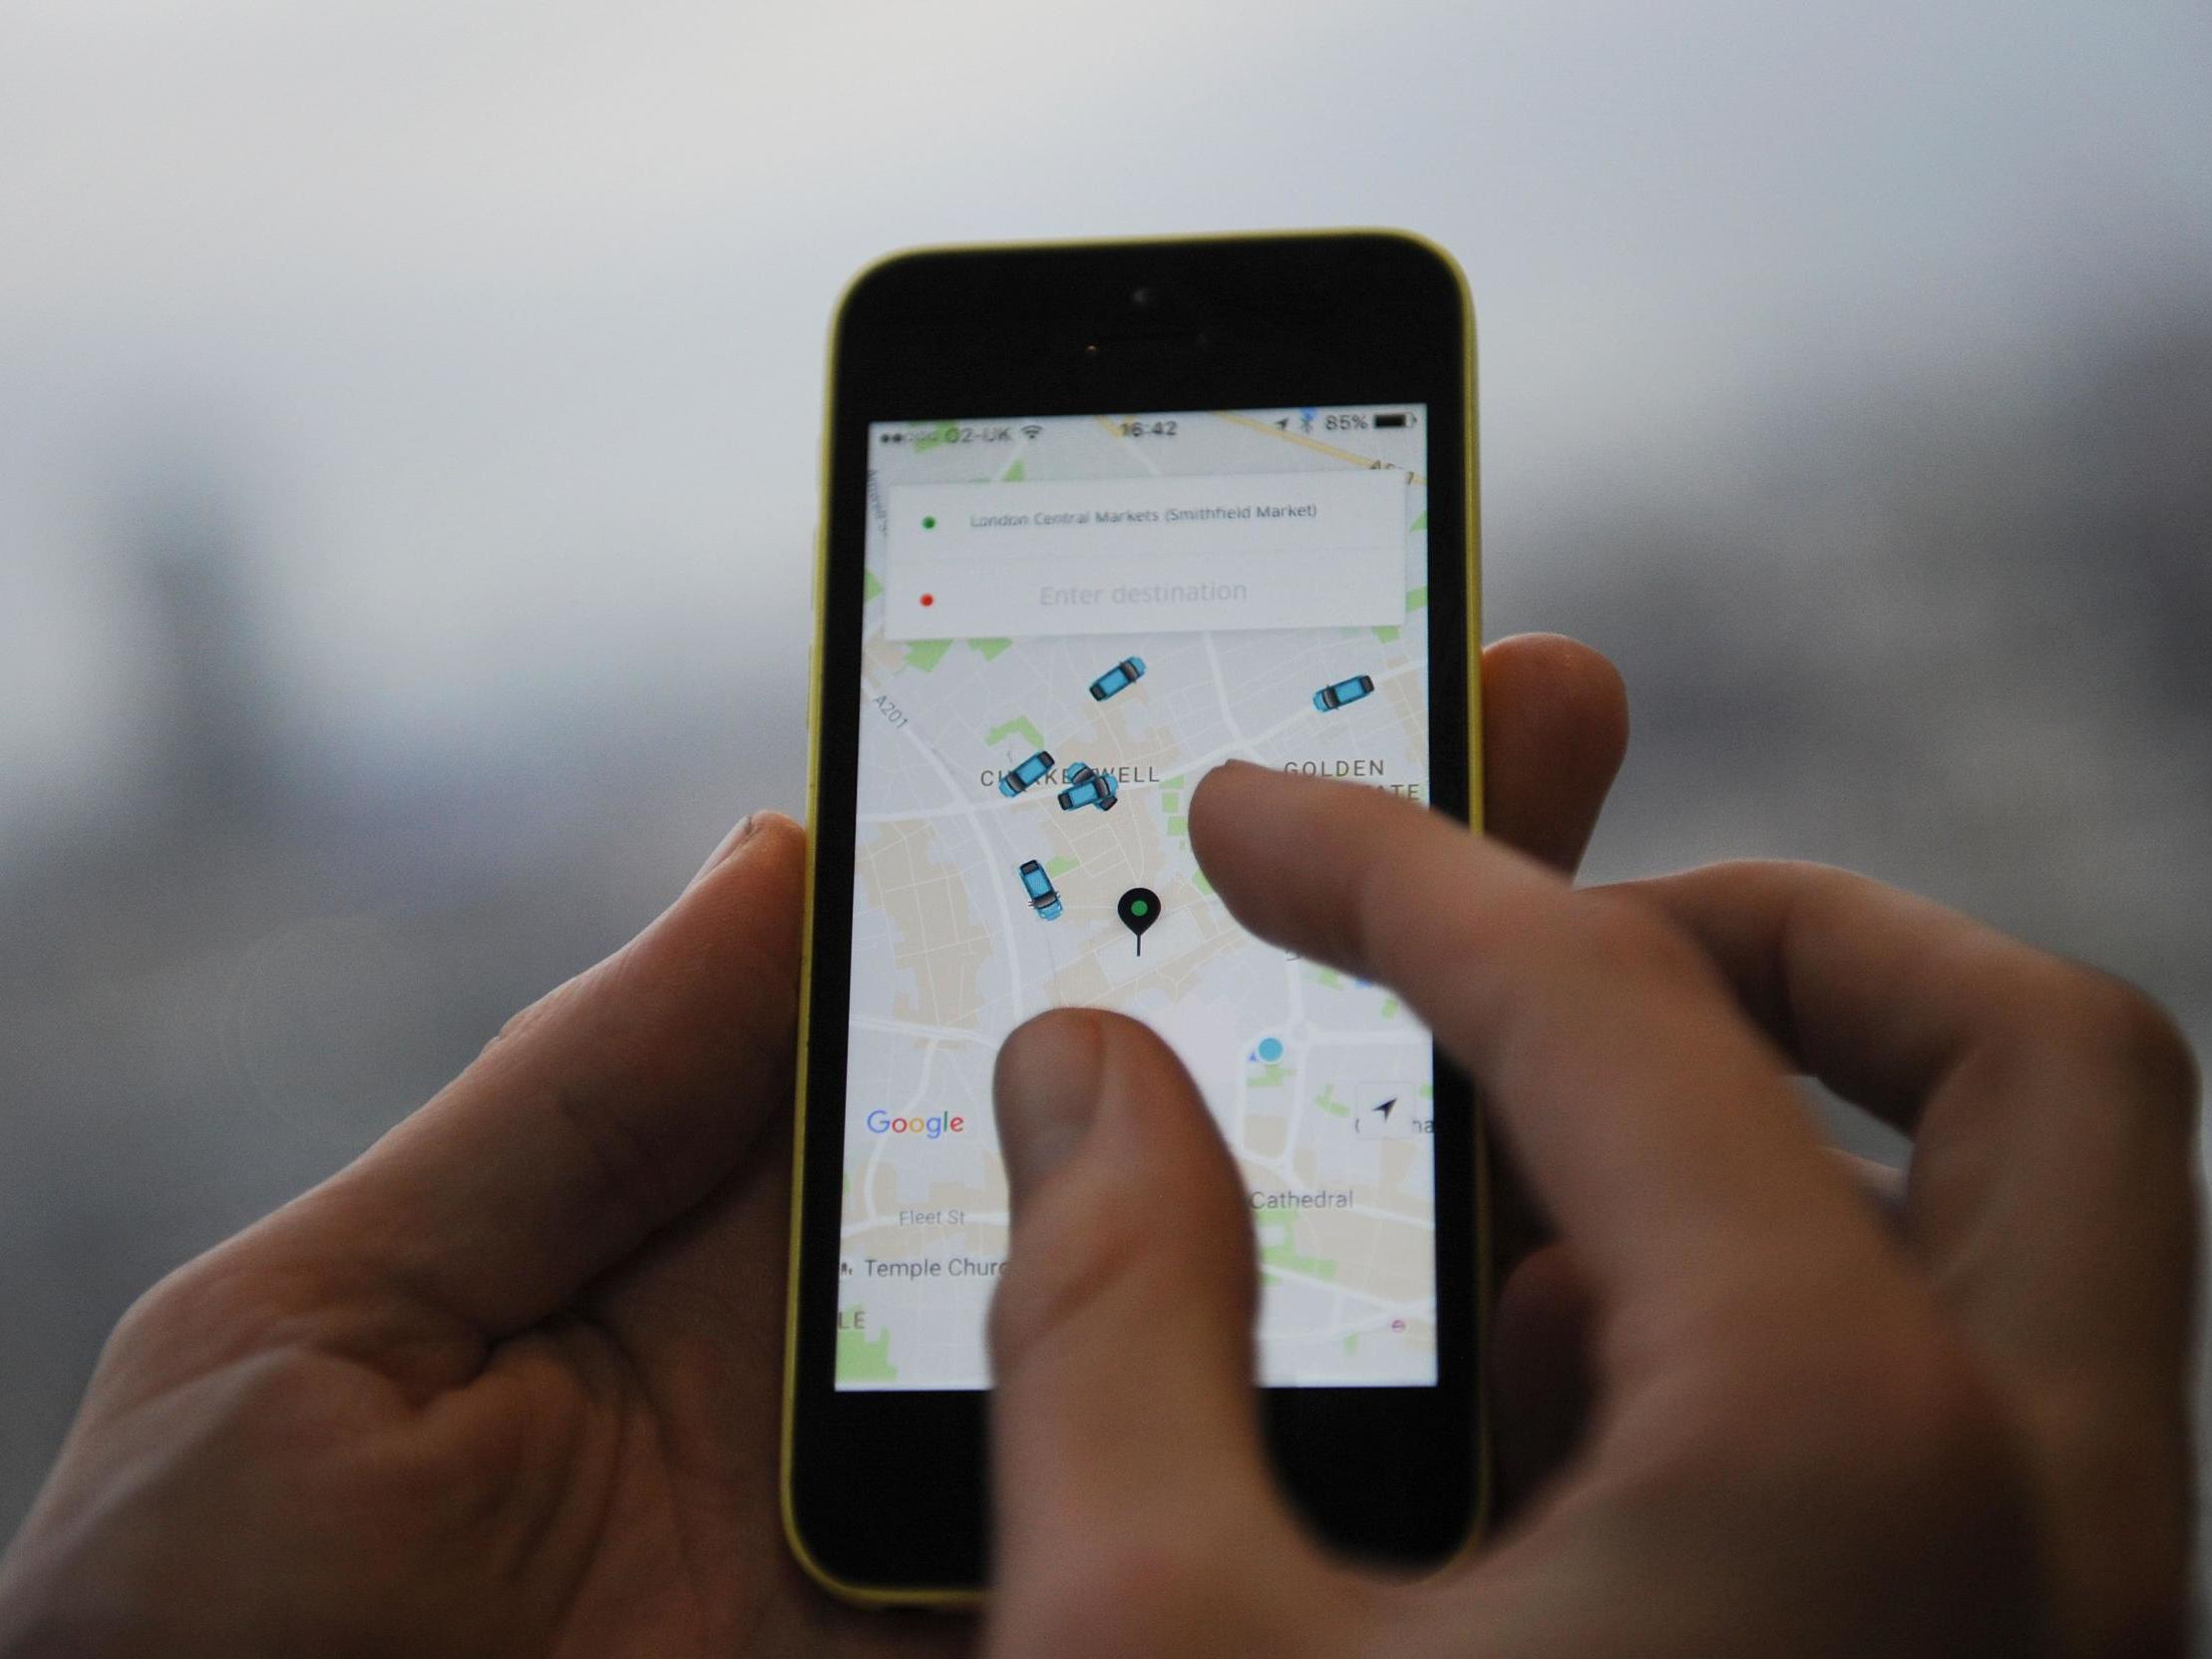 Uber has banned a driver from using its app after he refused to pick up two Jewish passengers